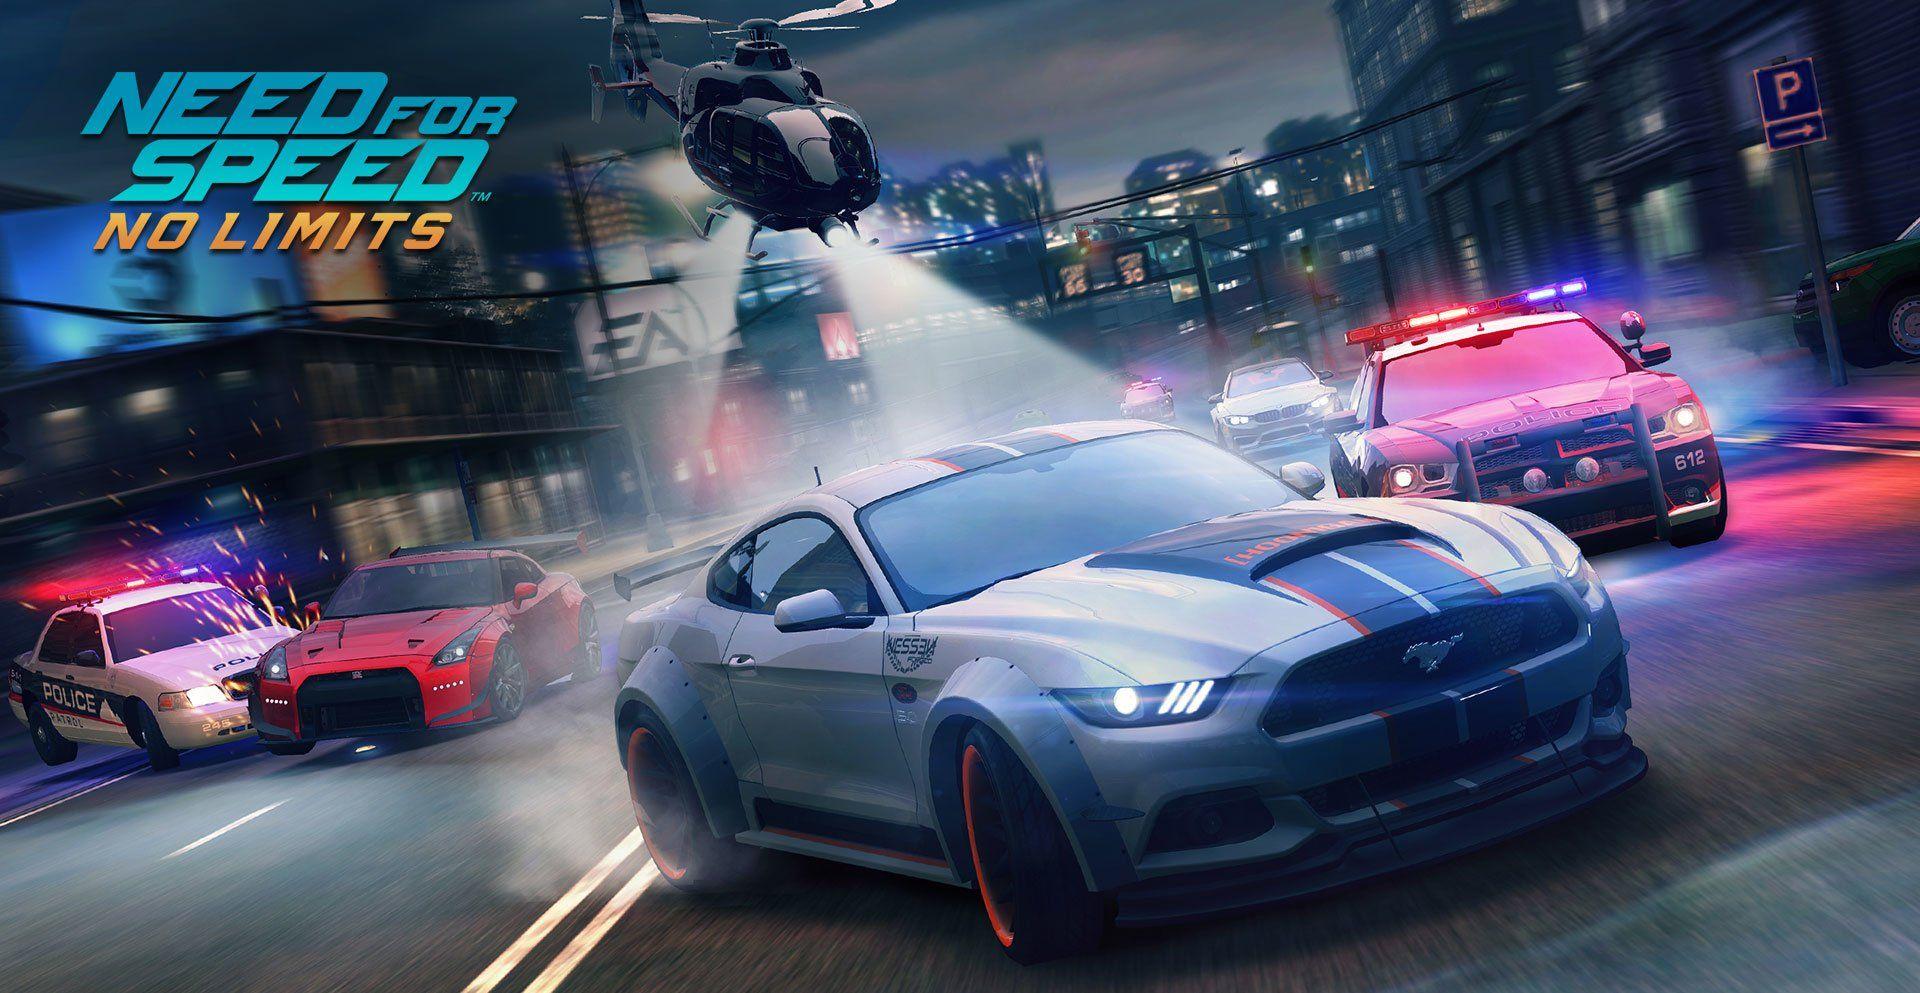 Need For Speed Games Wallpapers Wallpaper Cave Images, Photos, Reviews